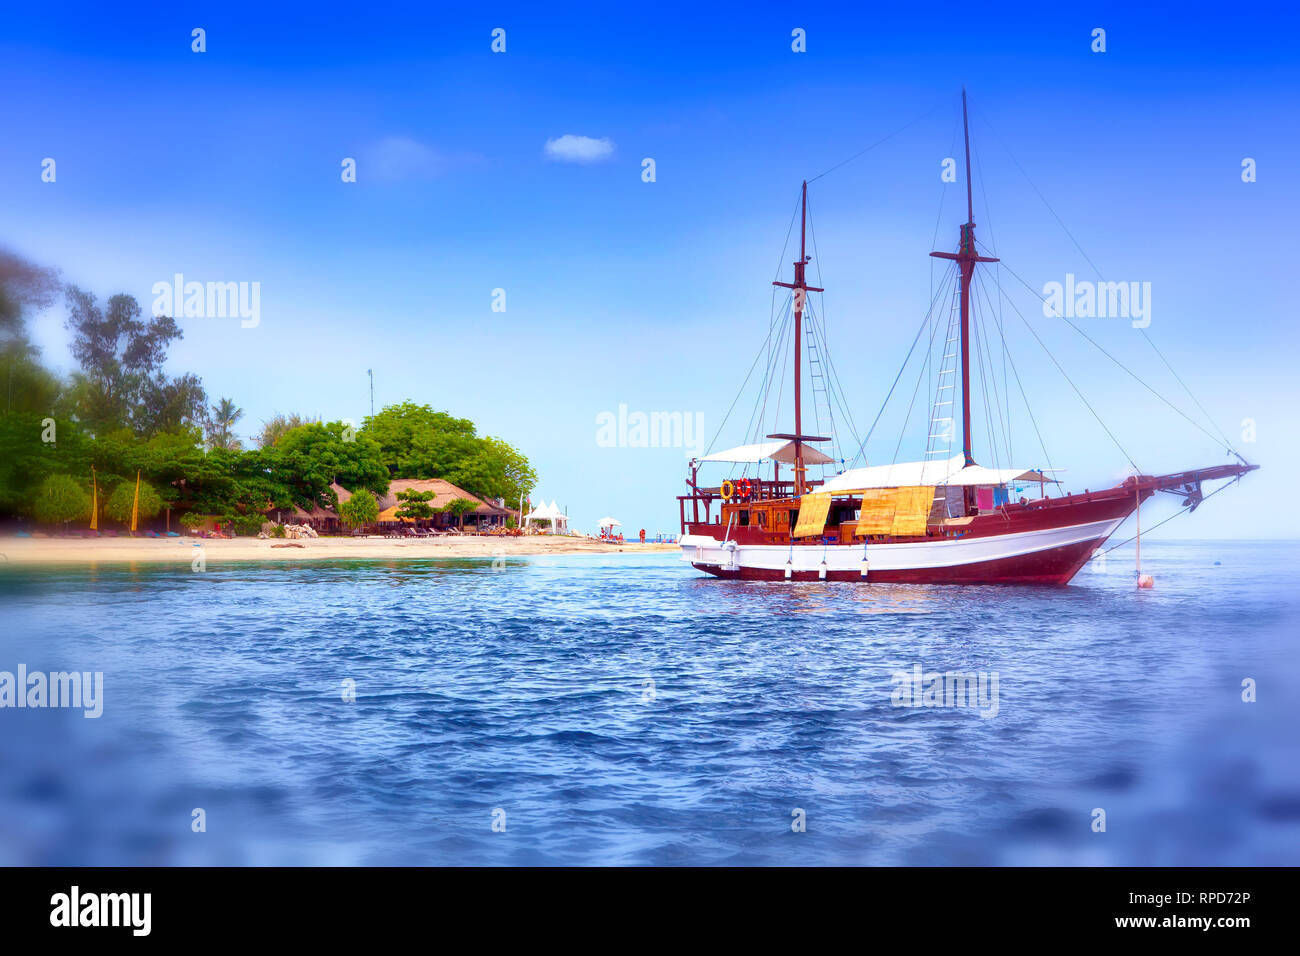 Old sailing ship in the ocean Stock Photo